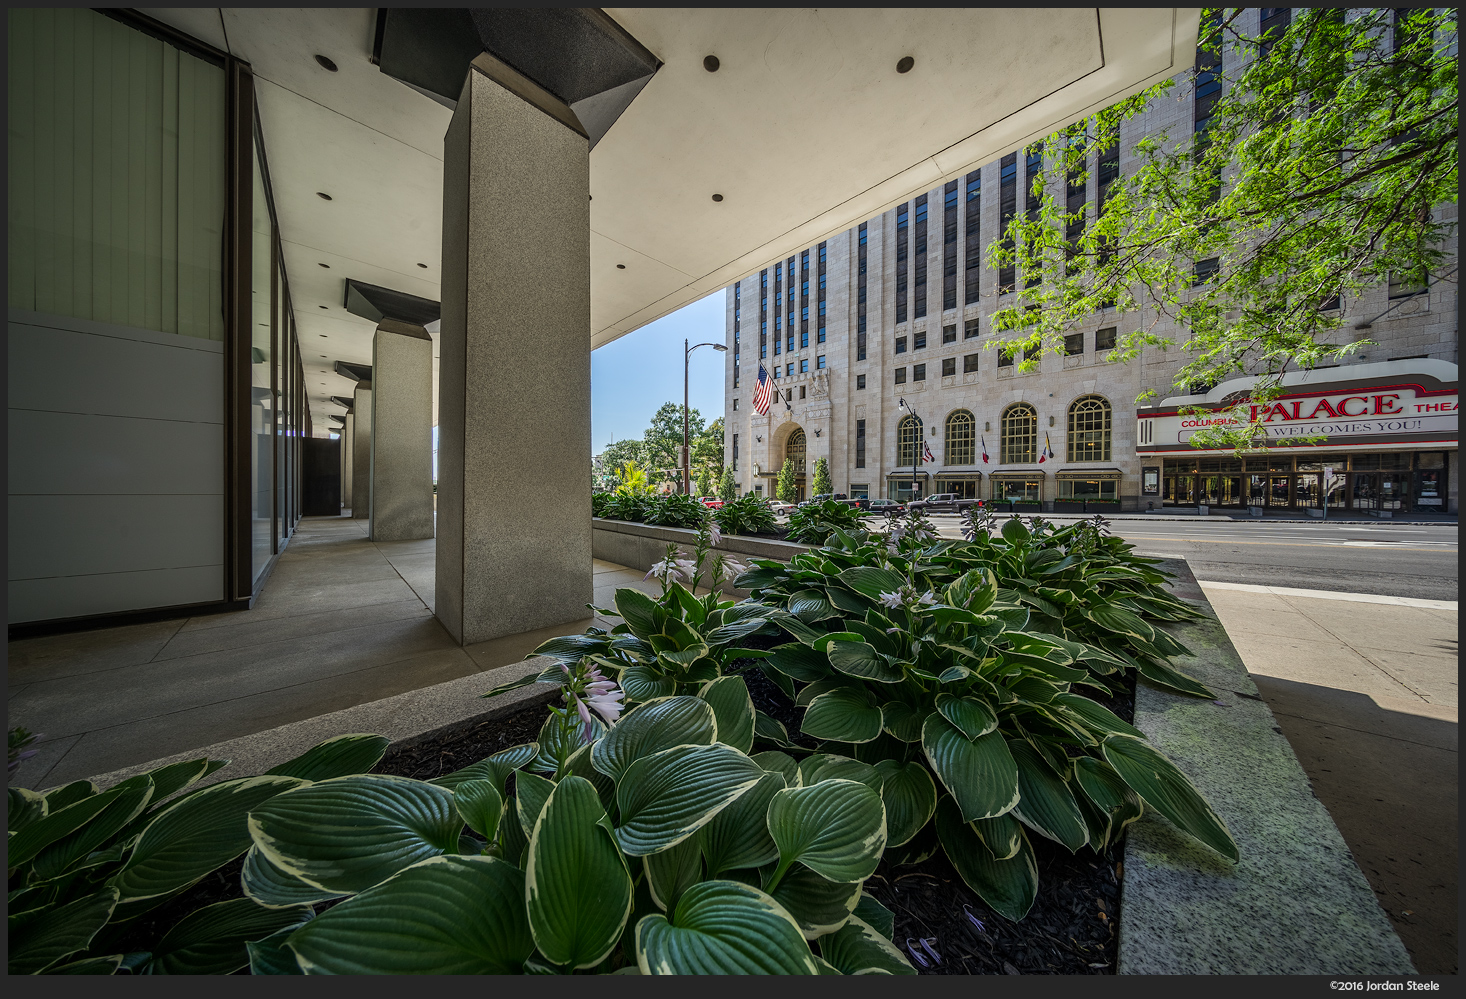 Outdoor Planters - Sony A7 II with Voigtländer 10mm f/5.6 @ f/11